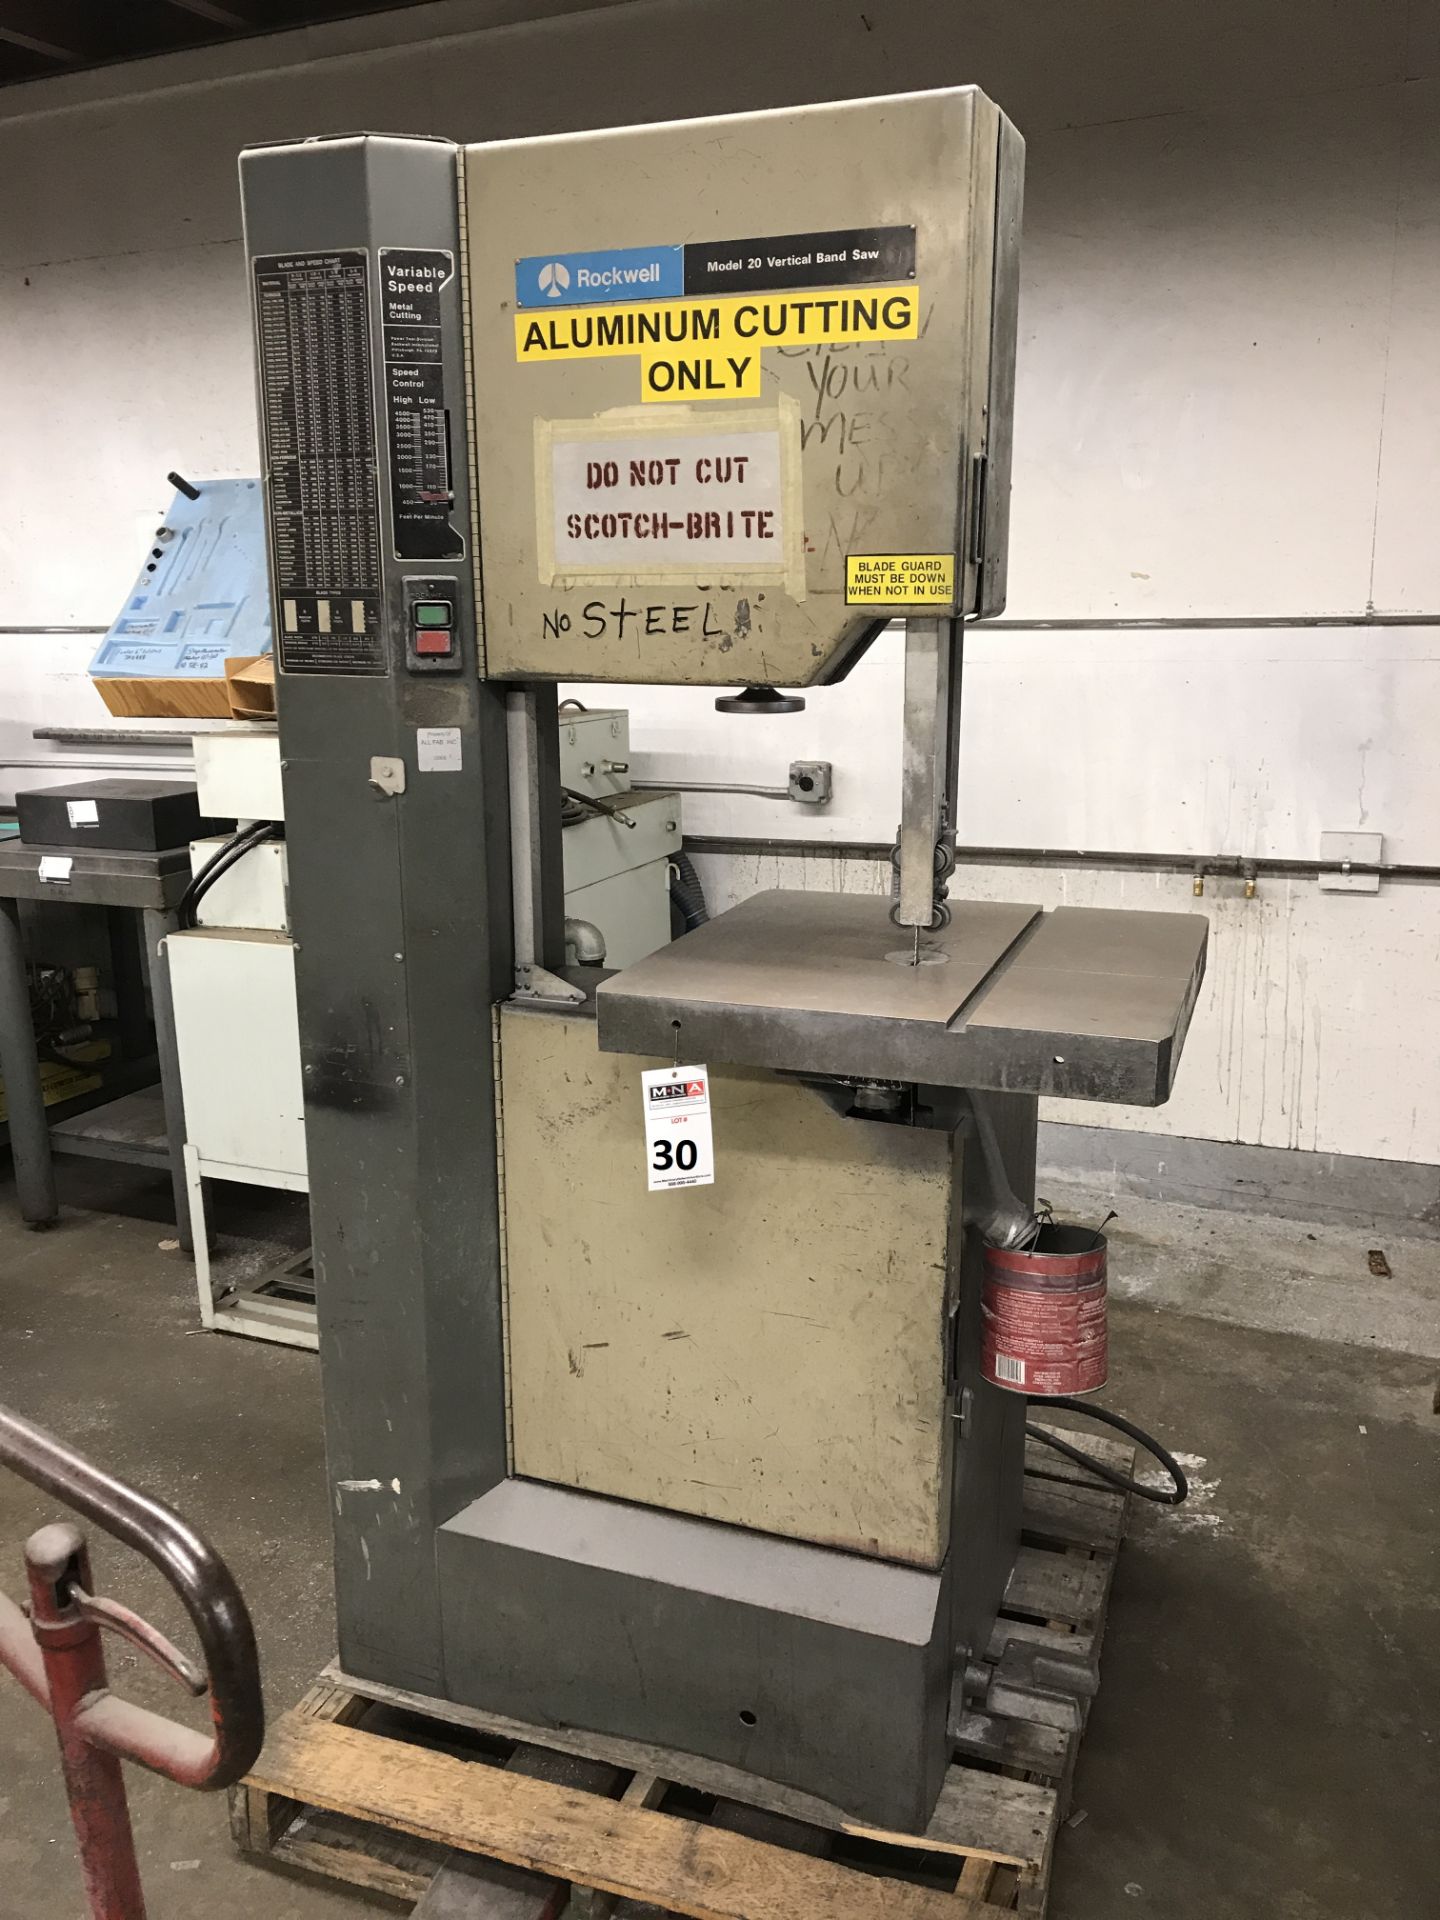 Rockwell 20" Bandsaw; Model 20 Veritcal Band Saw; Variable Speed;